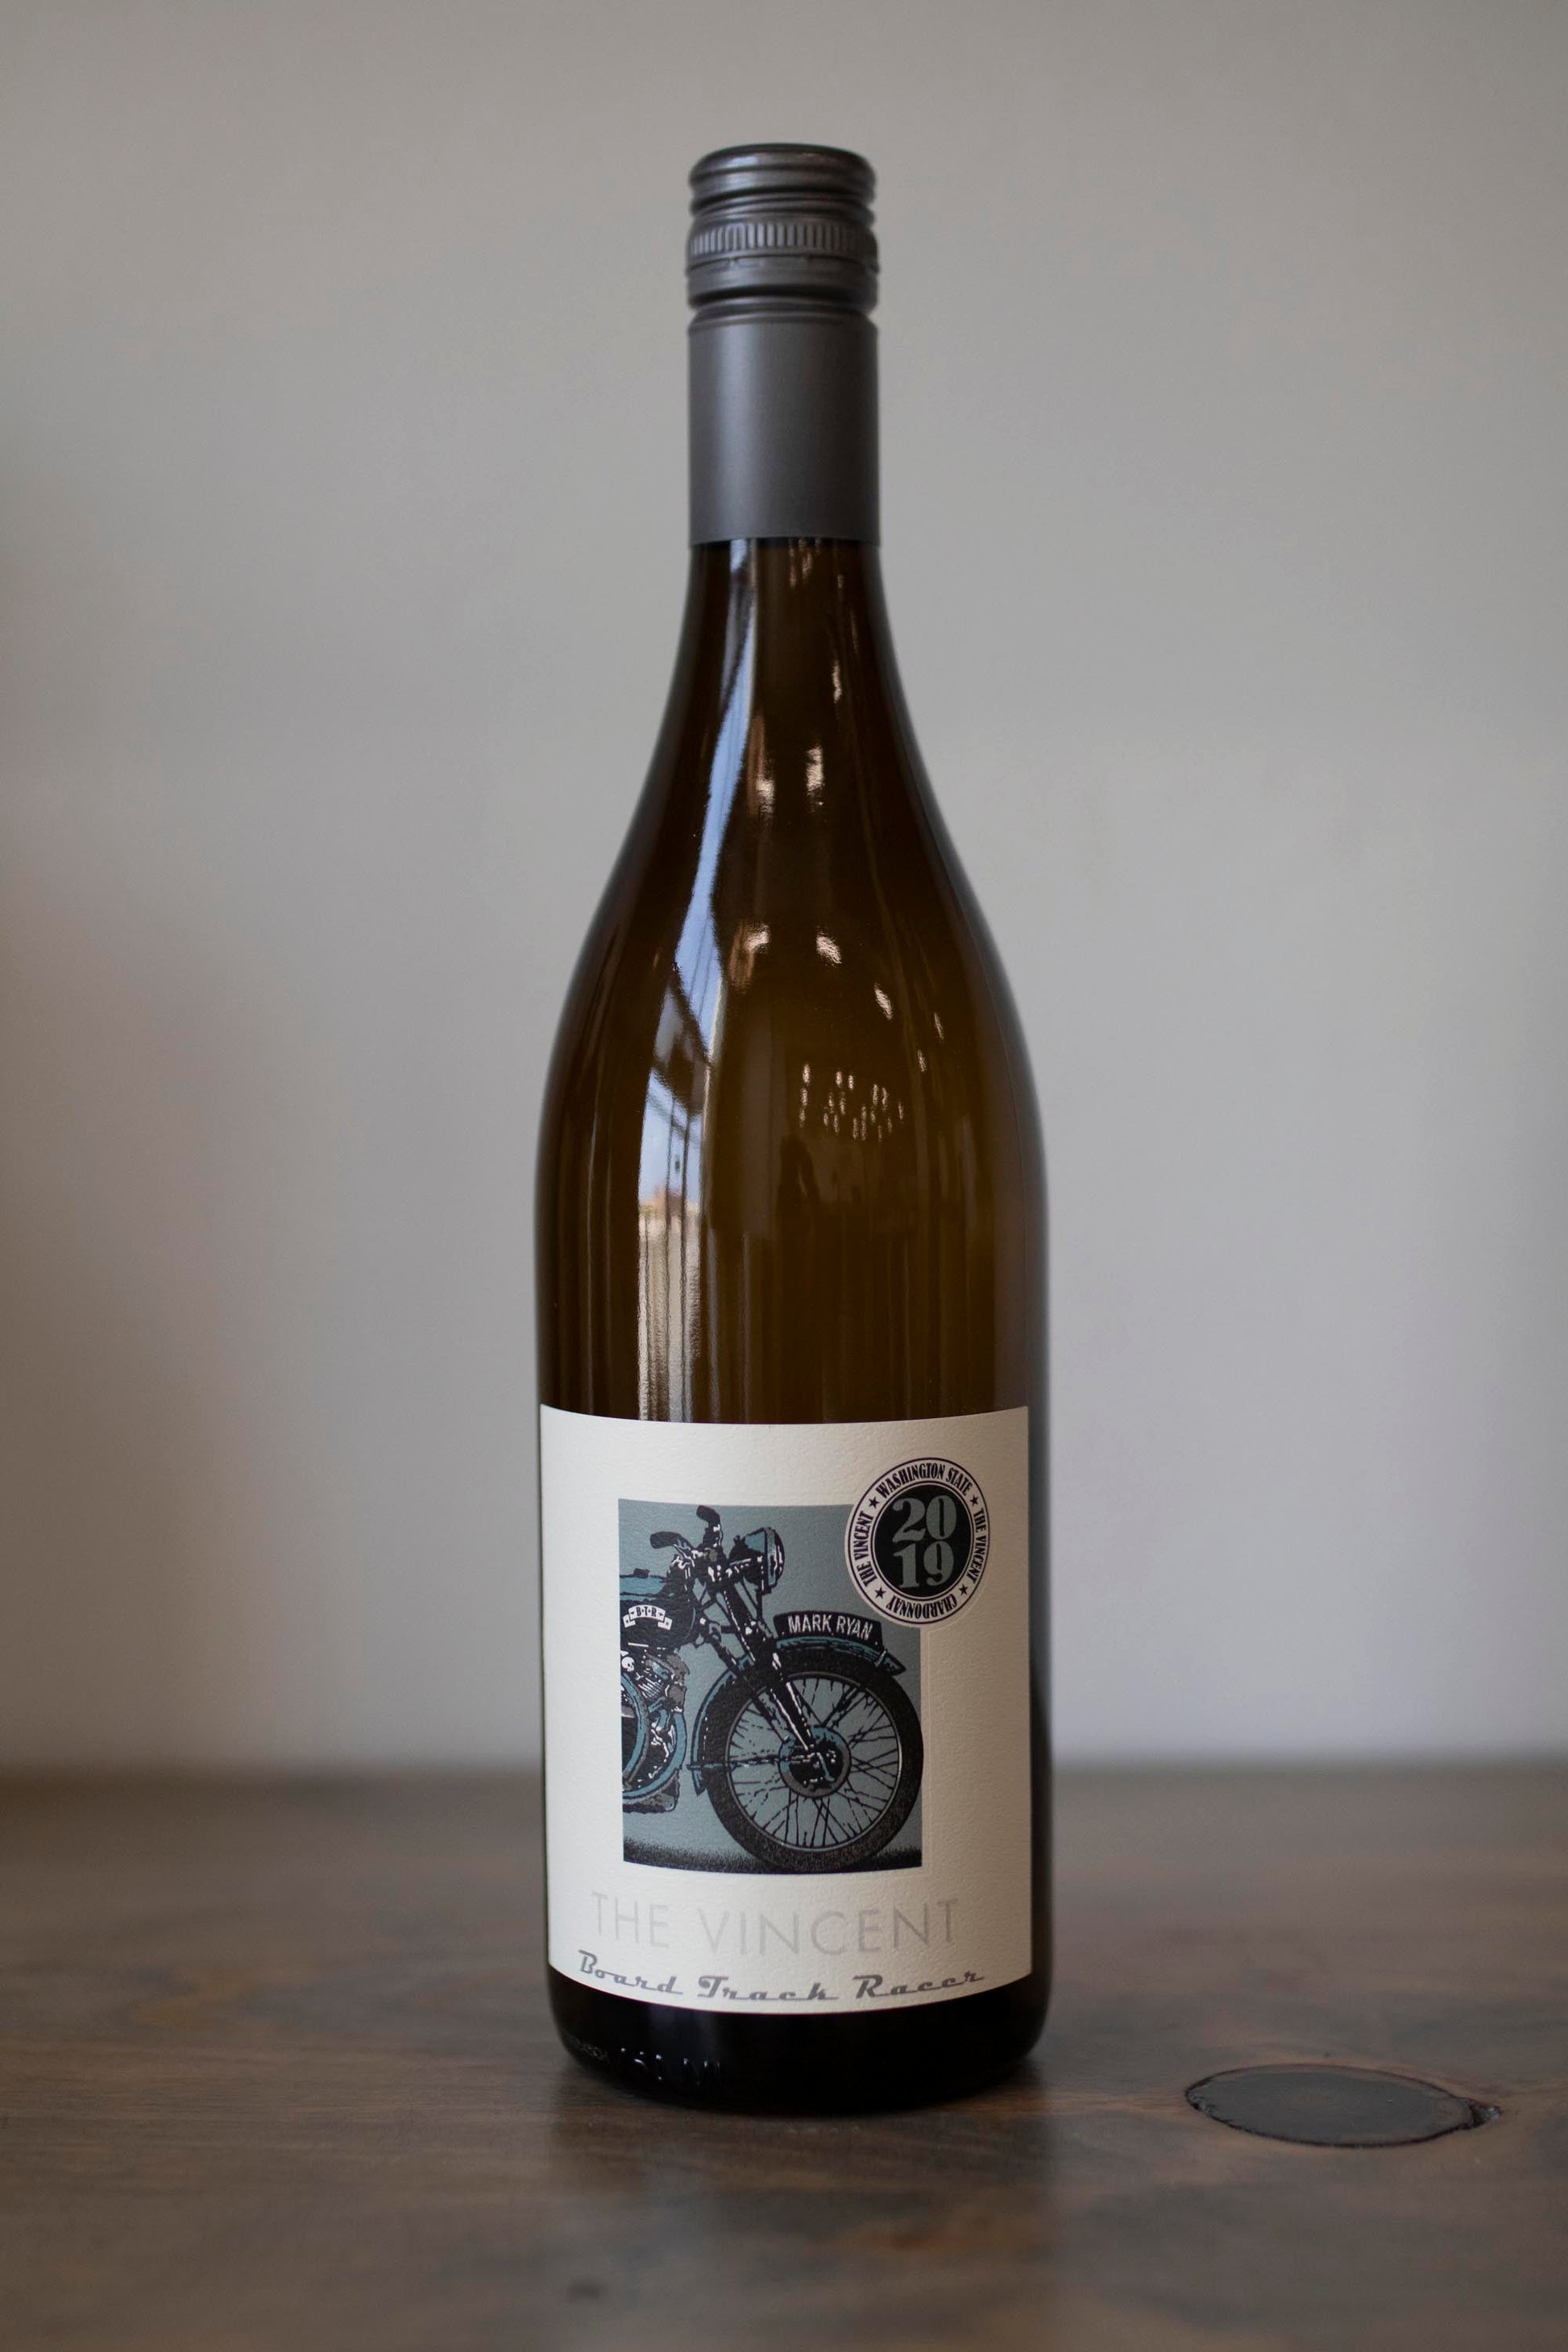 Bottle of The Vincent chard found at Vine & Board in 3809 NW 166th St Suite 1, Edmond, OK 73012